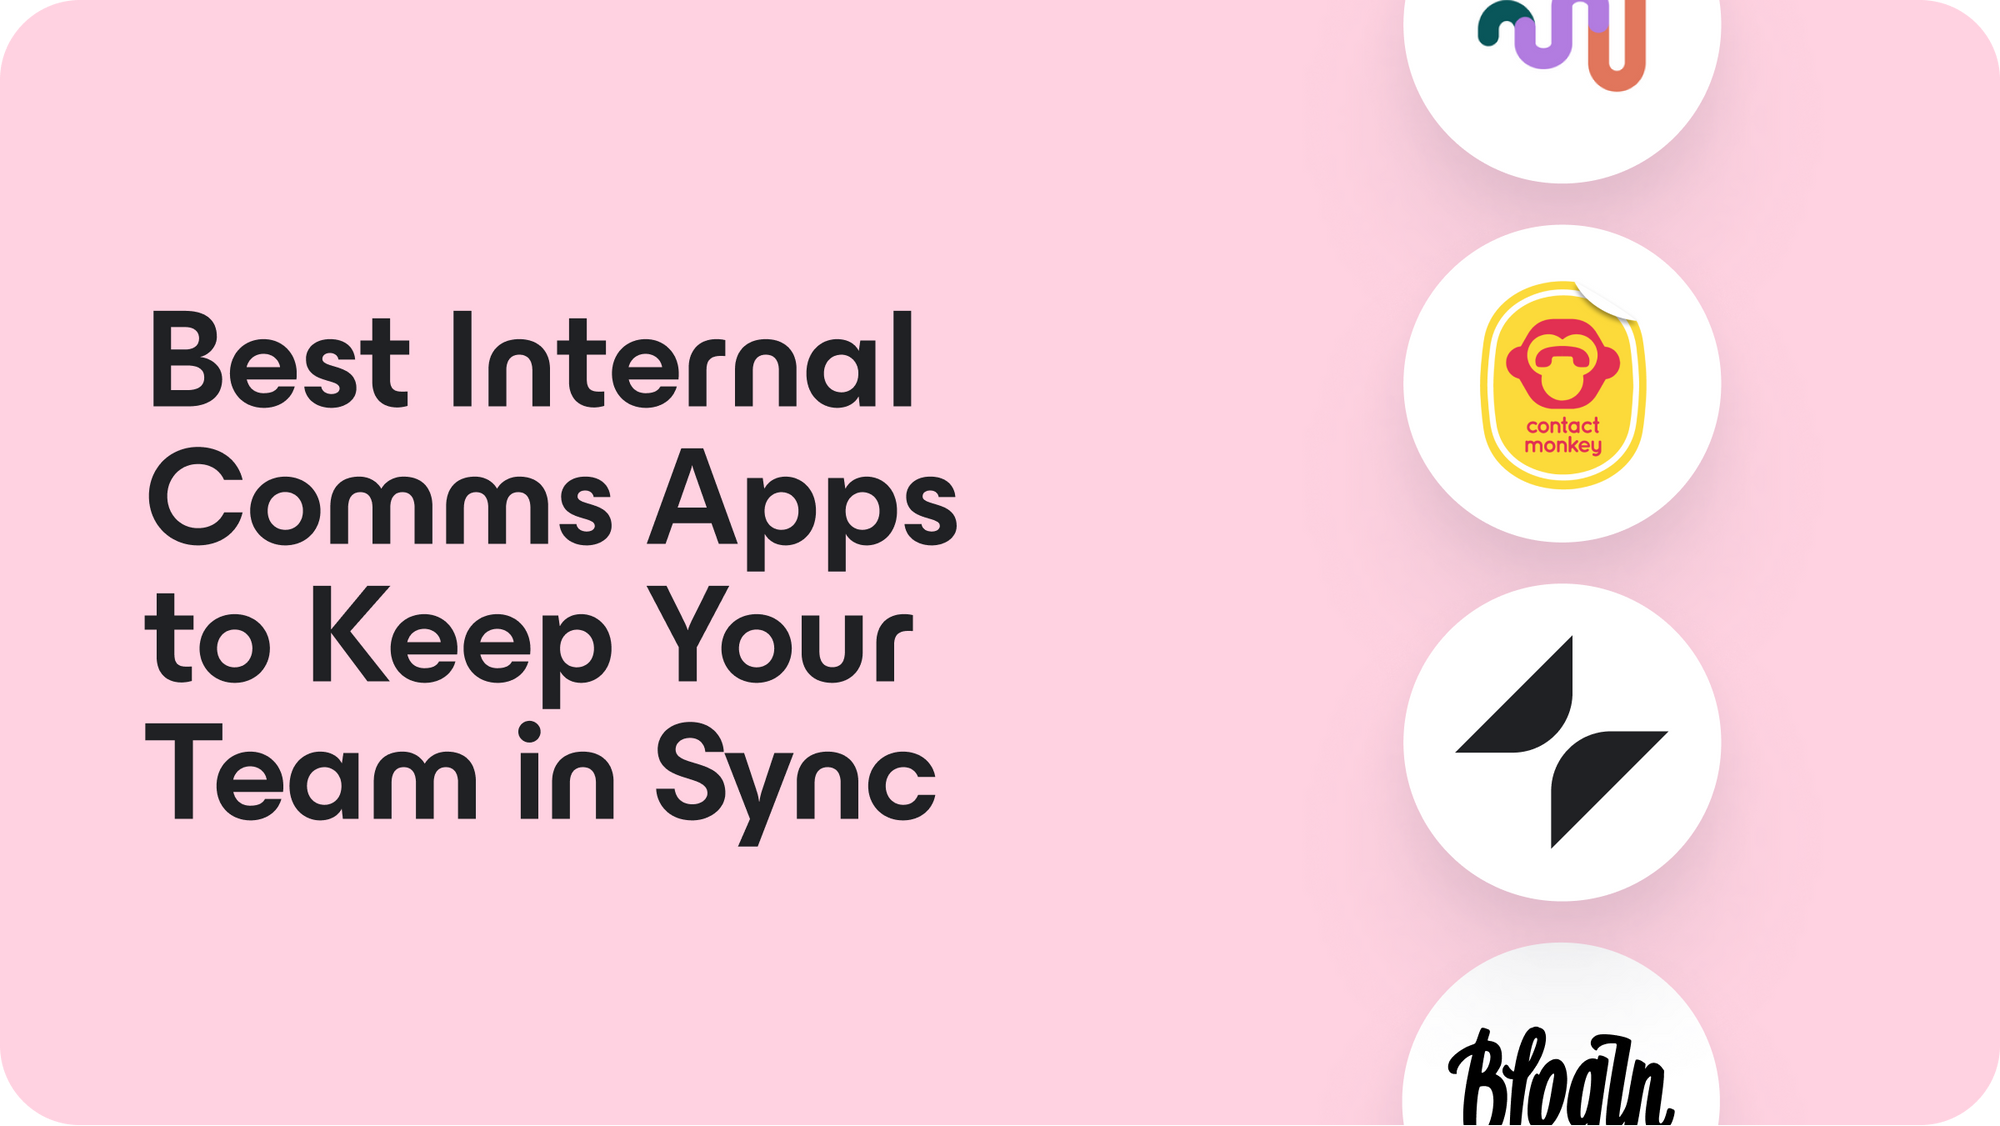 Check Out These 4 Internal Comms Apps